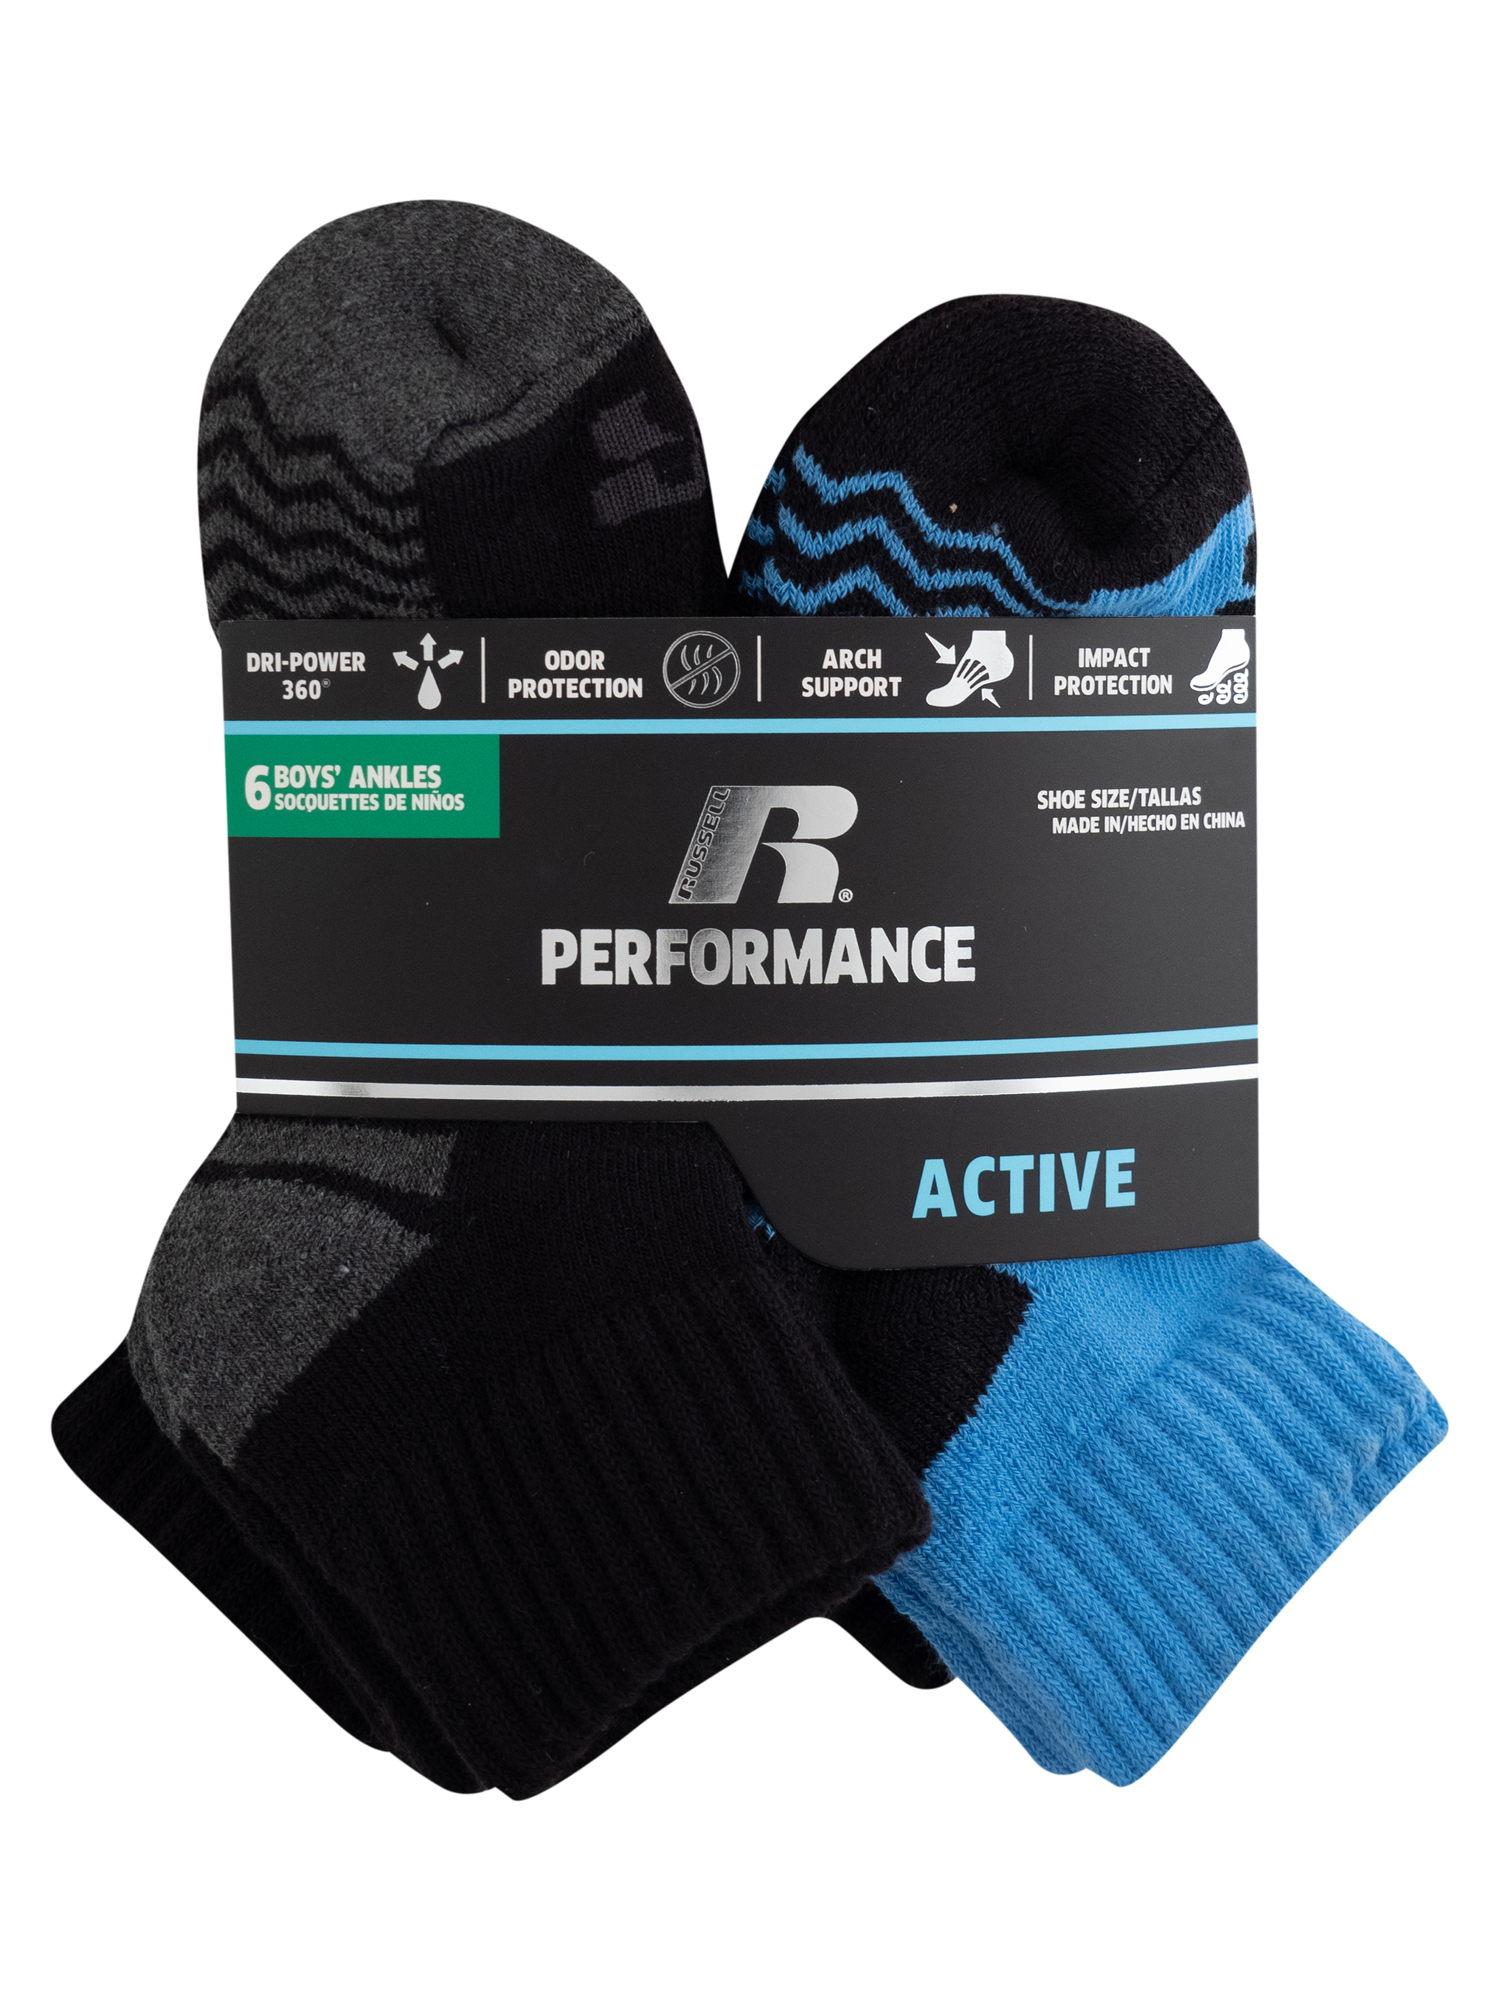 Russell Active Boys Ankle Socks 6 Pack Socks - image 4 of 4